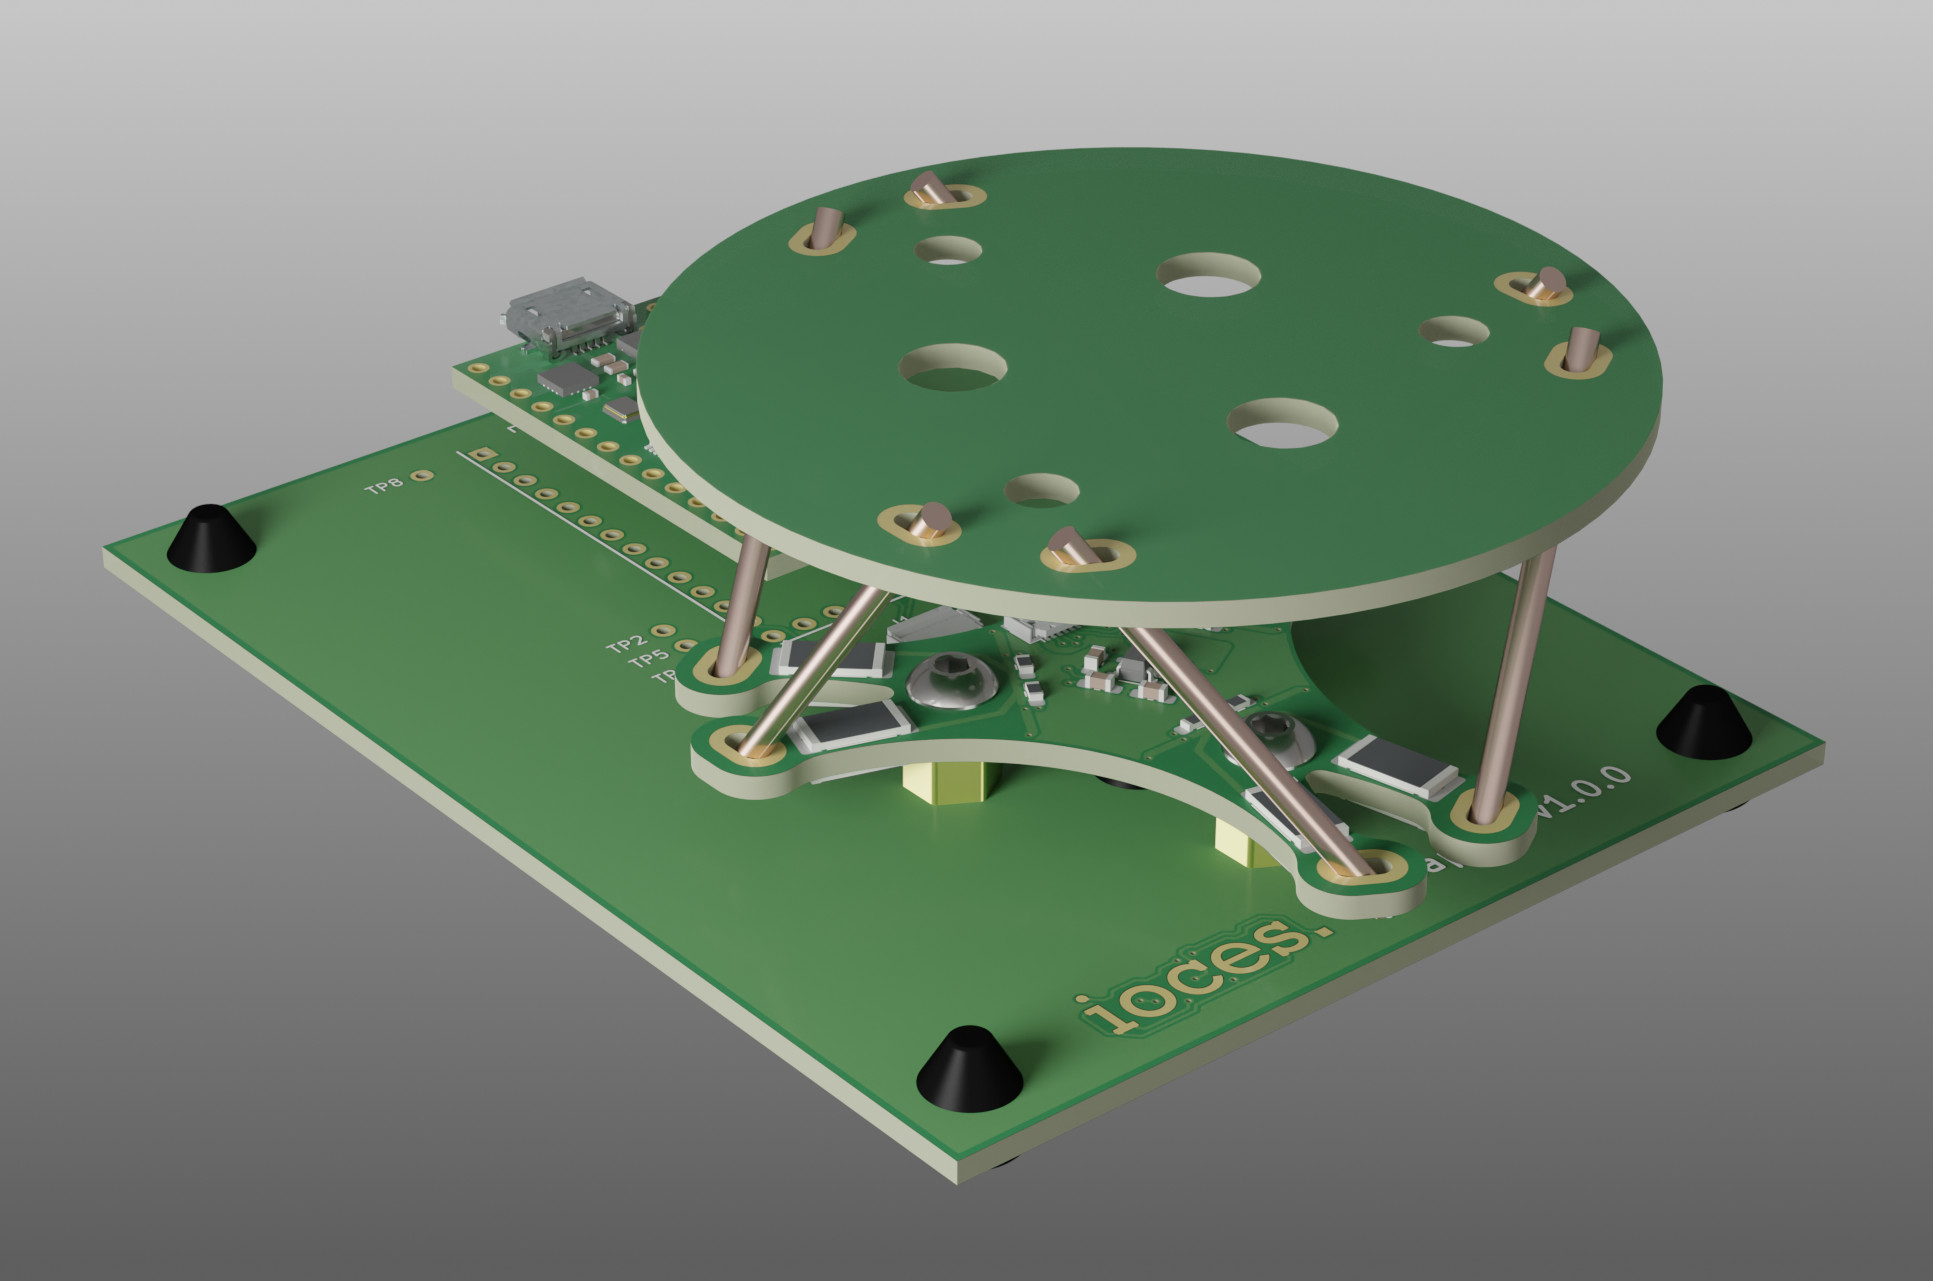 A 3D rendering of a rectangular circuit board with a Stewart platform made from PCBs on top of it. At the back of the circuit board is a small microcontroller board with a micro USB connector poking out the back.